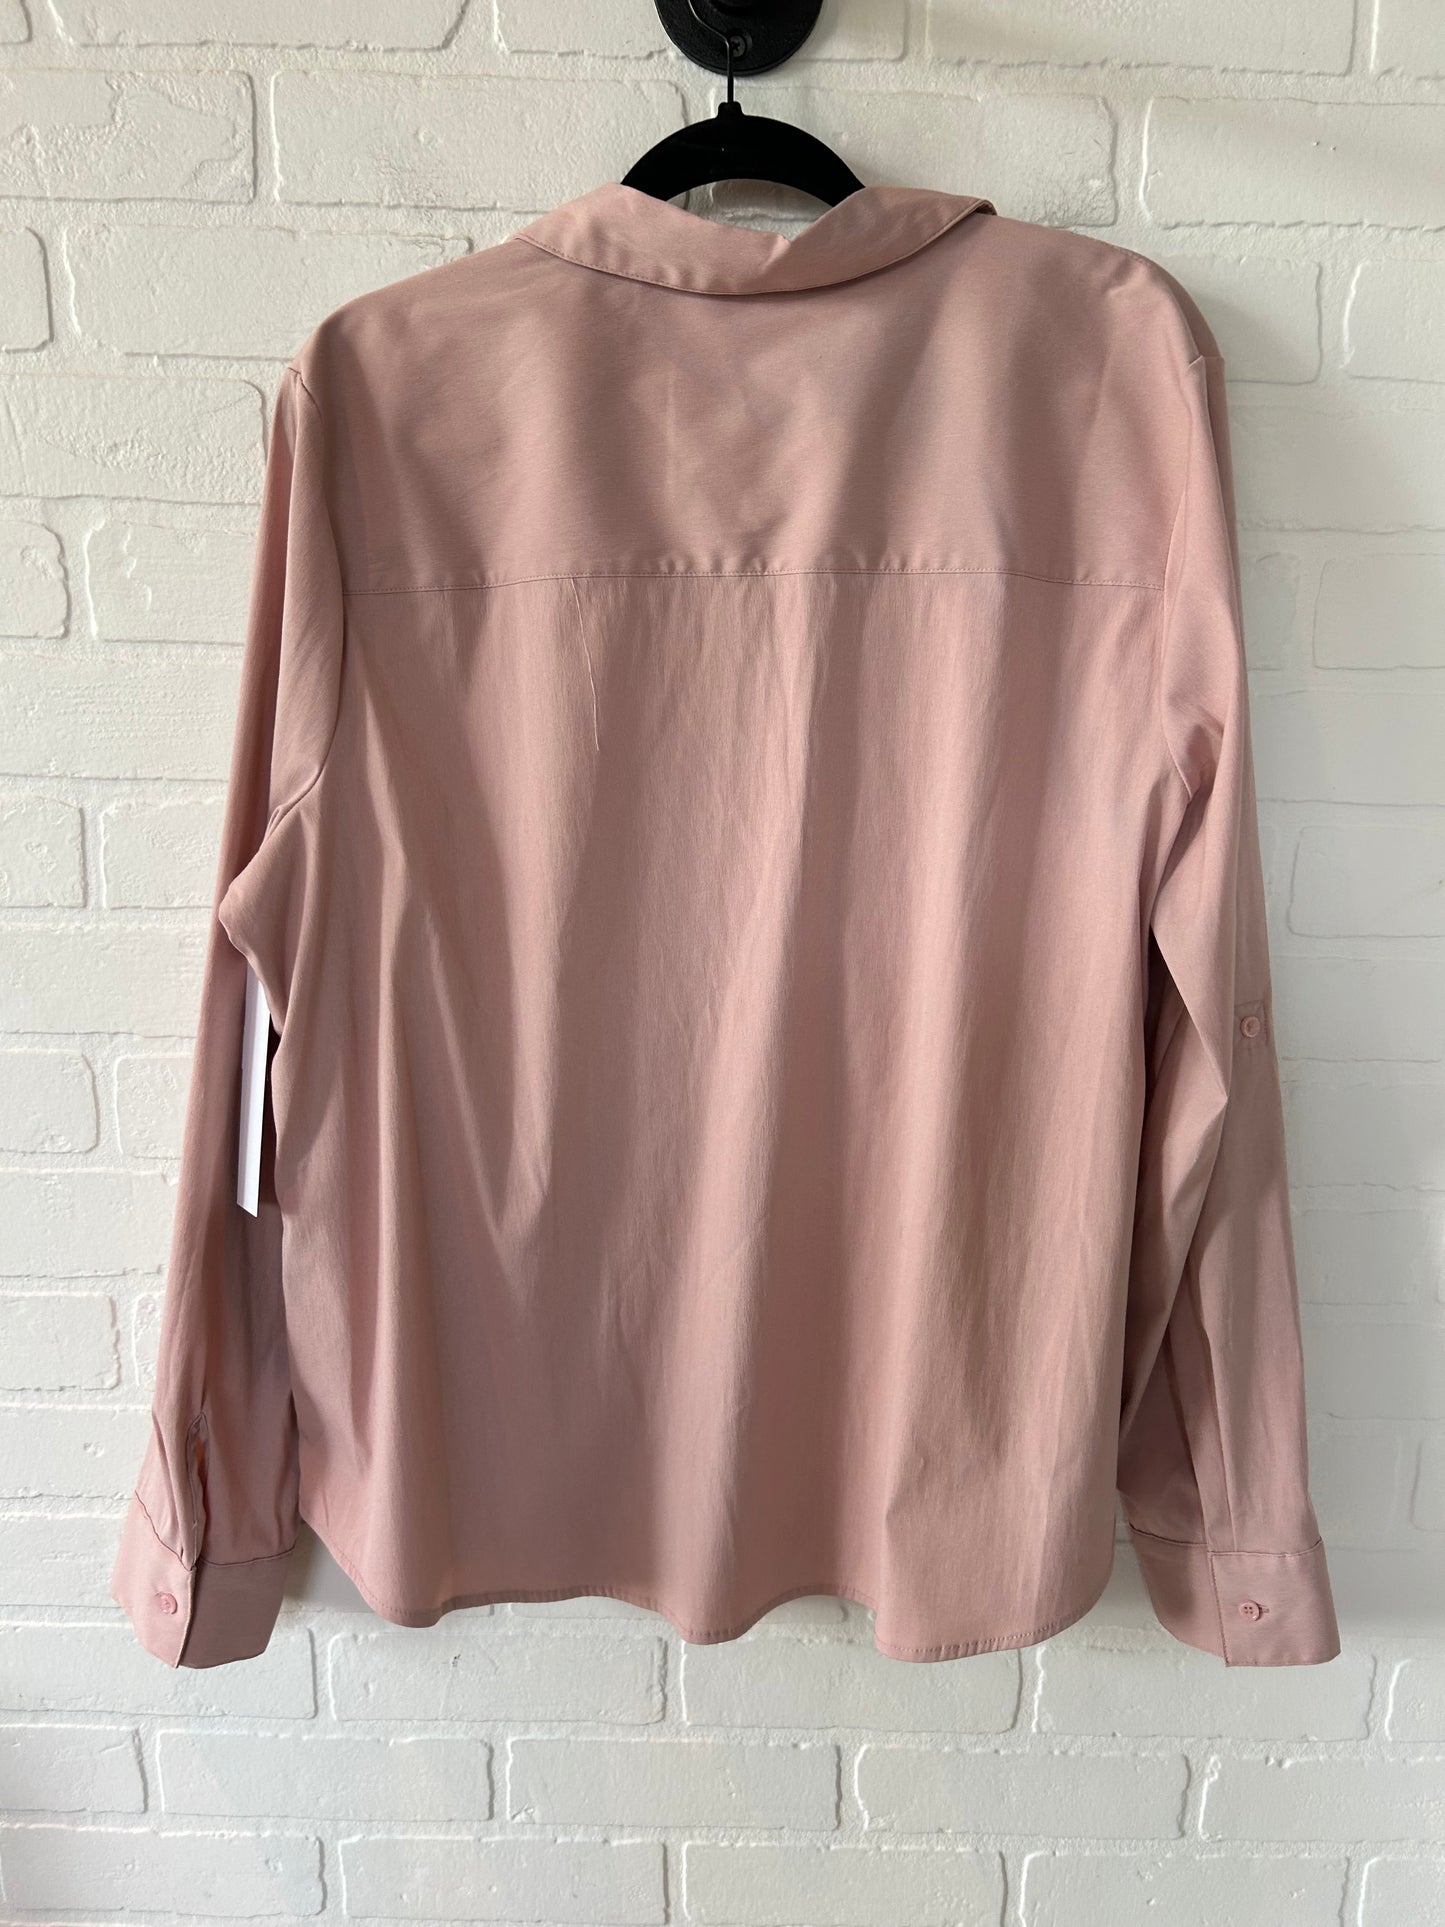 Pink Top Long Sleeve Elle, Size 1x